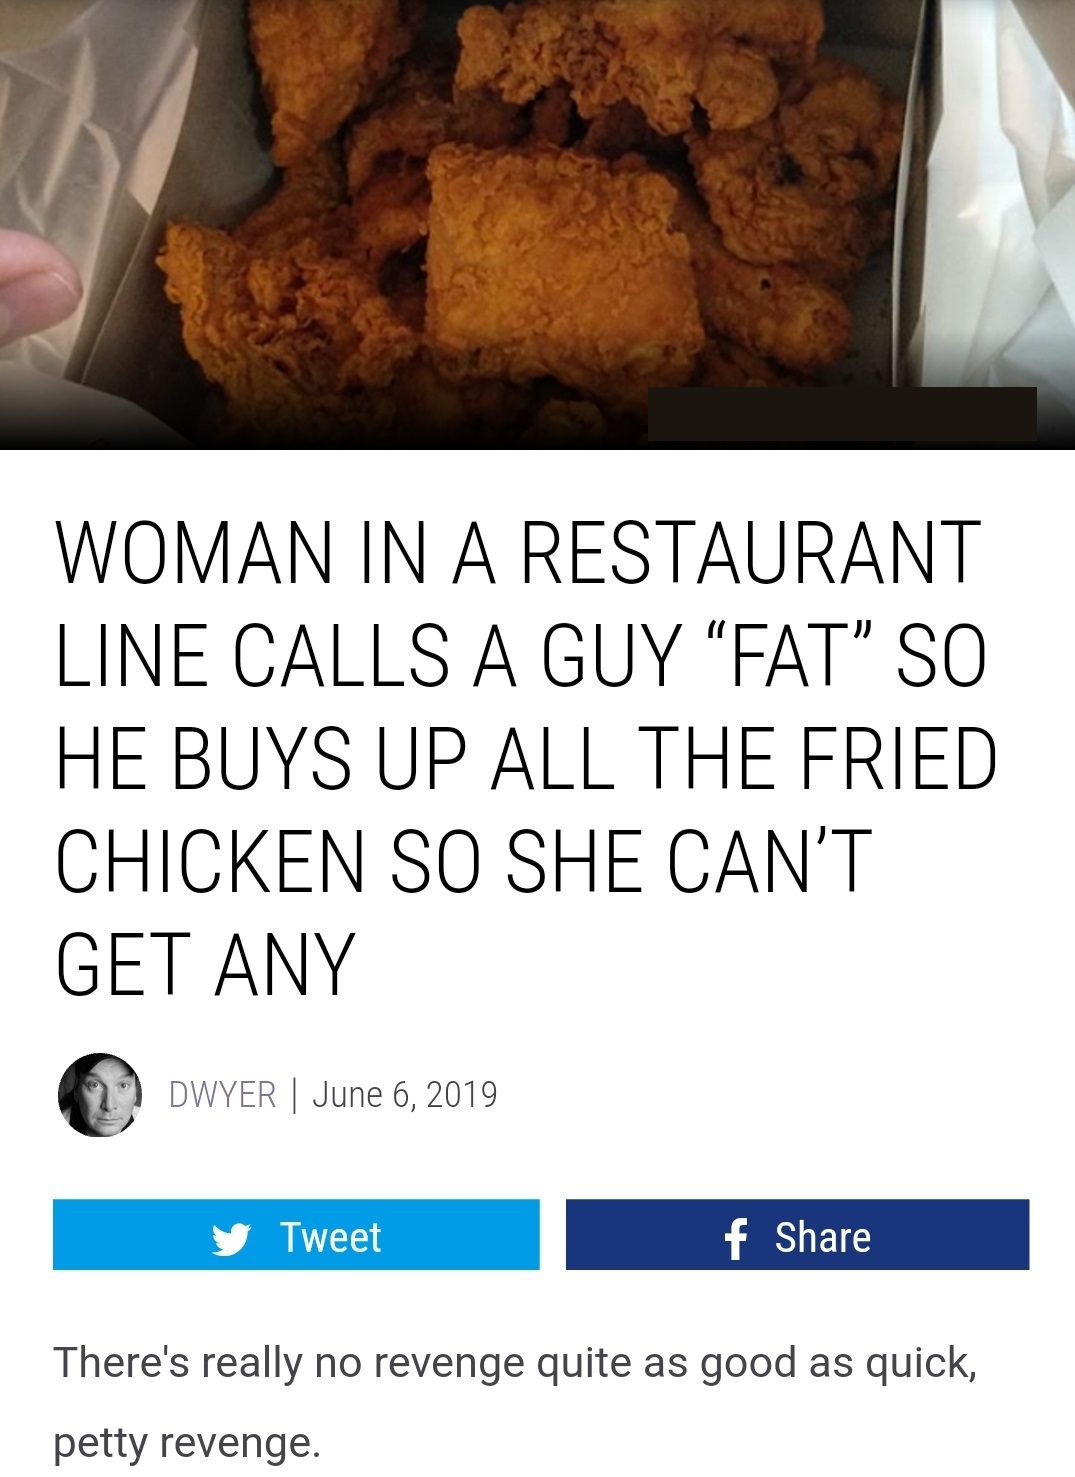 food - Woman In A Restaurant Line Calls A Guy Fat So He Buys Up All The Fried Chicken So She Can'T Get Any Dwyer | y Tweet f There's really no revenge quite as good as quick, petty revenge.